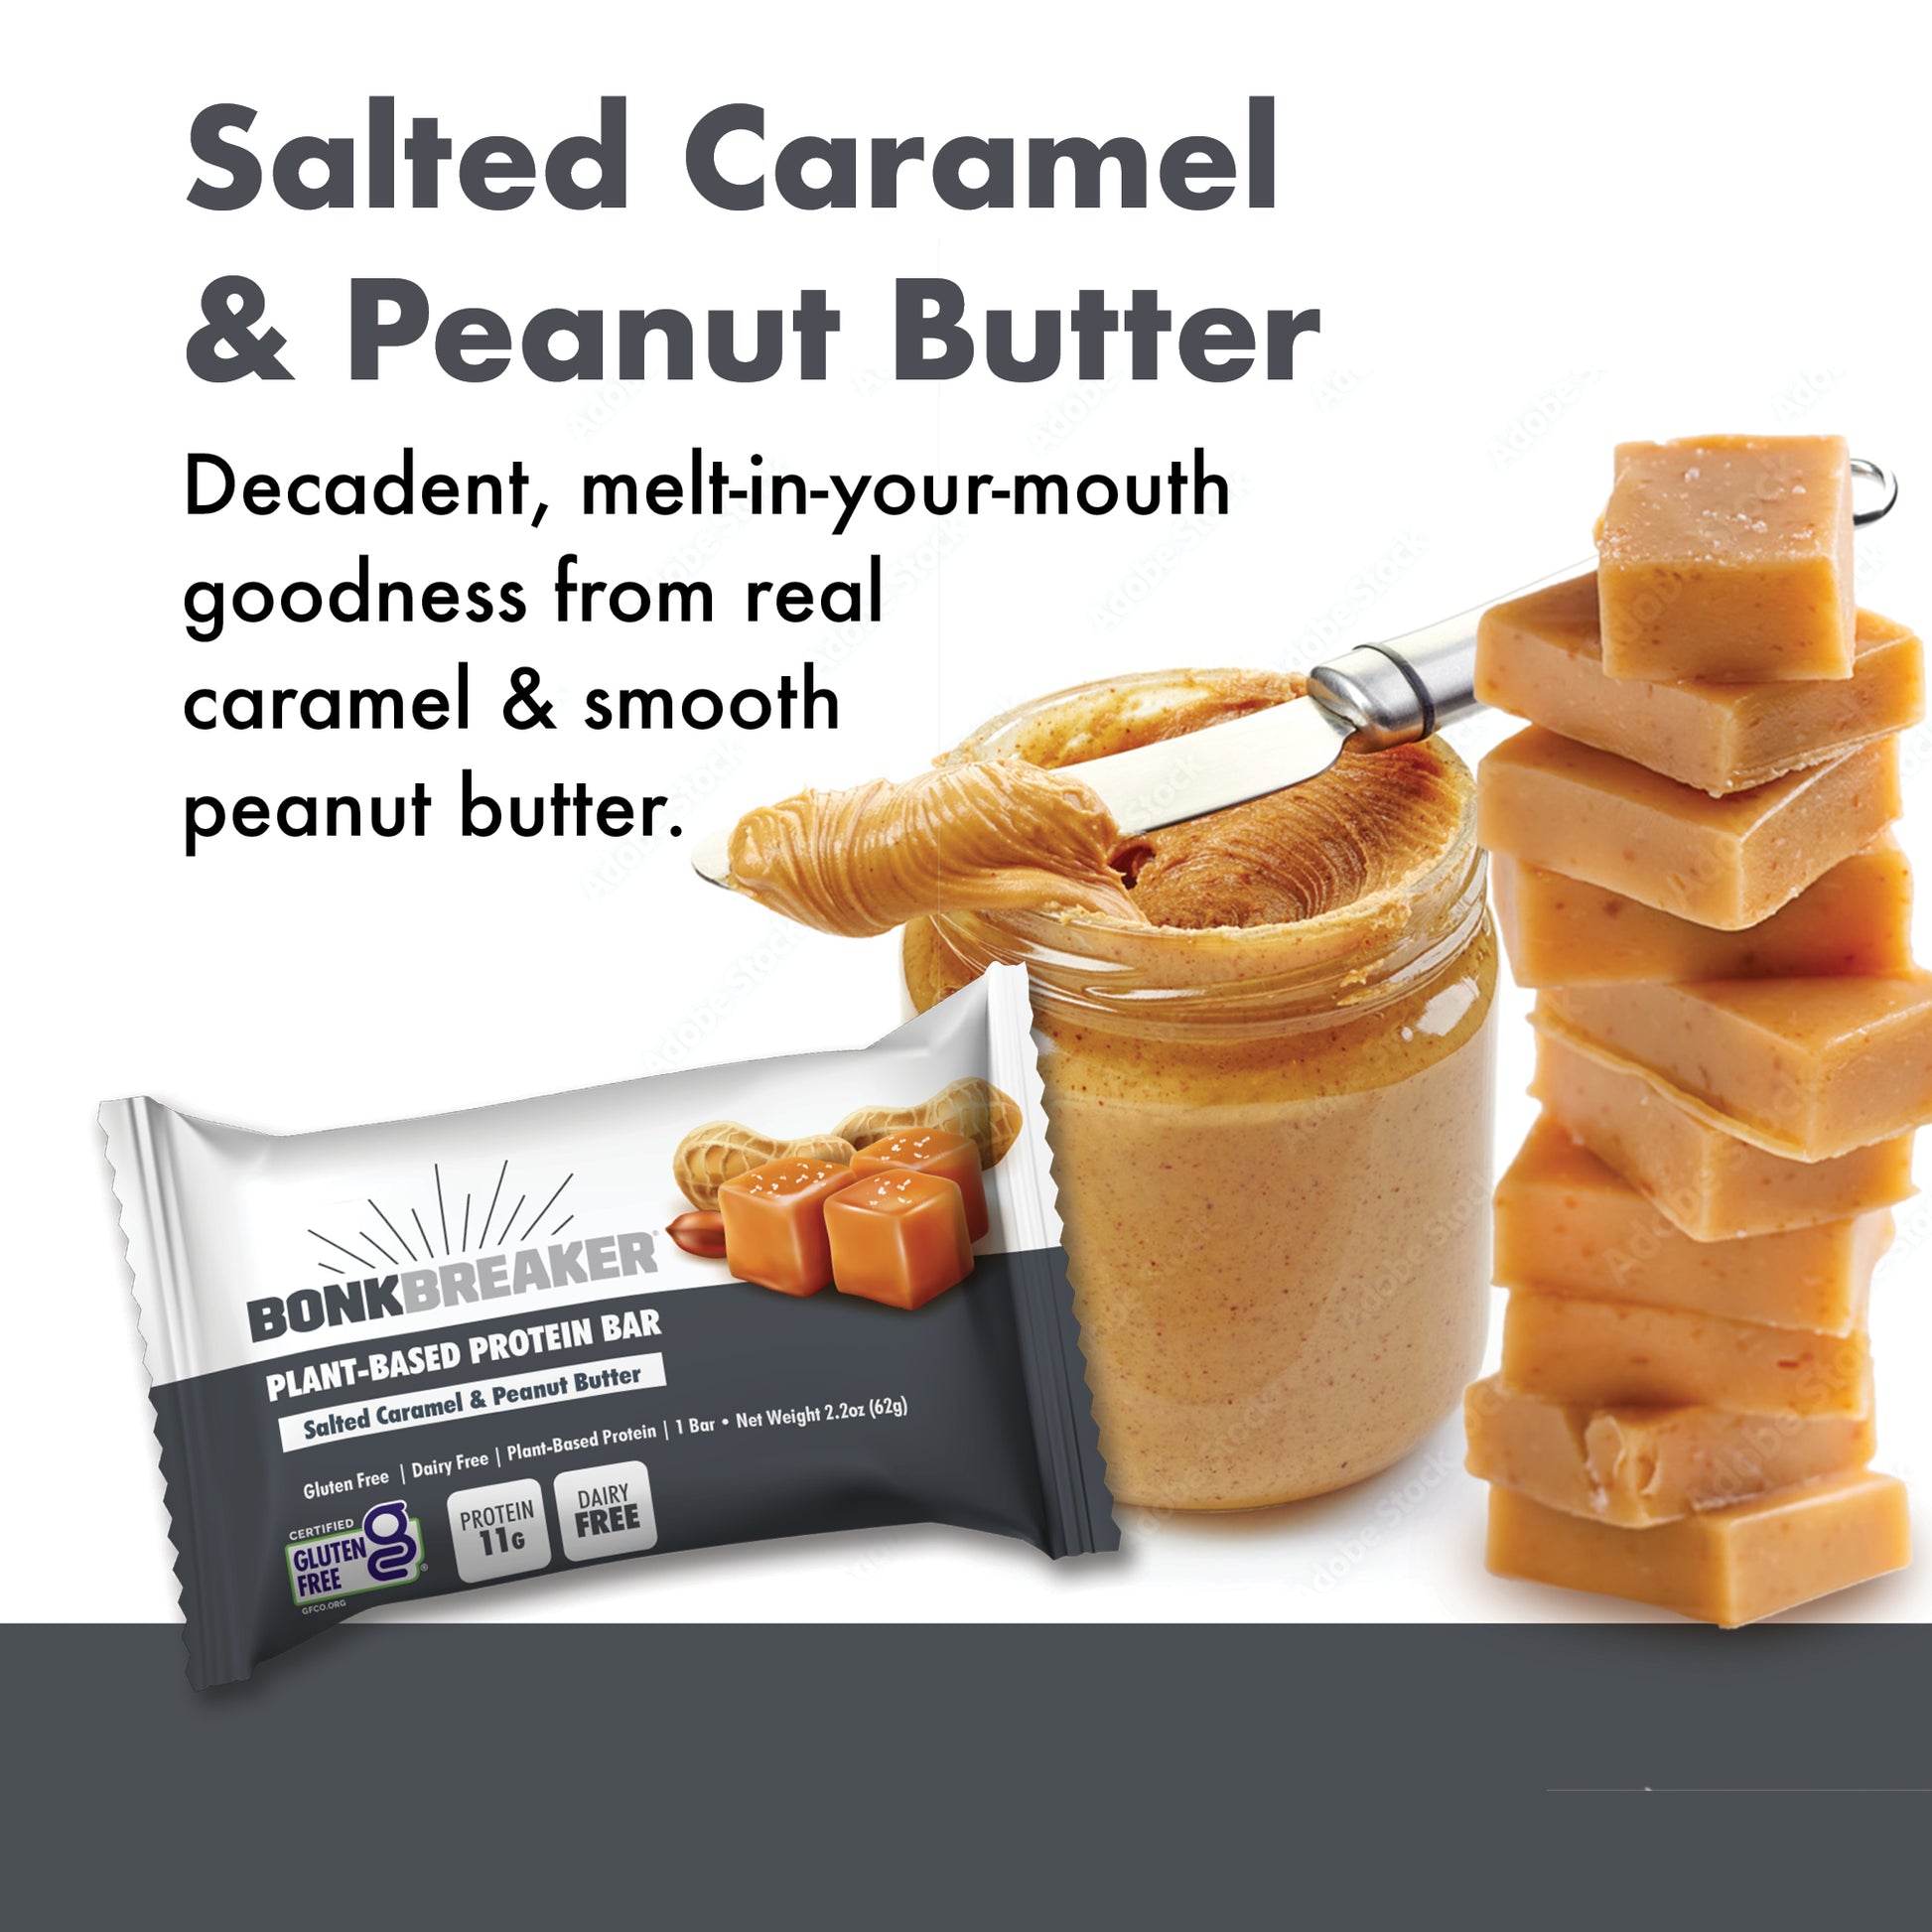 Salted Caramel & Peanut Butter - Decadent, melt-in-your-mouth goodness from real caramel & smooth peanut butter.